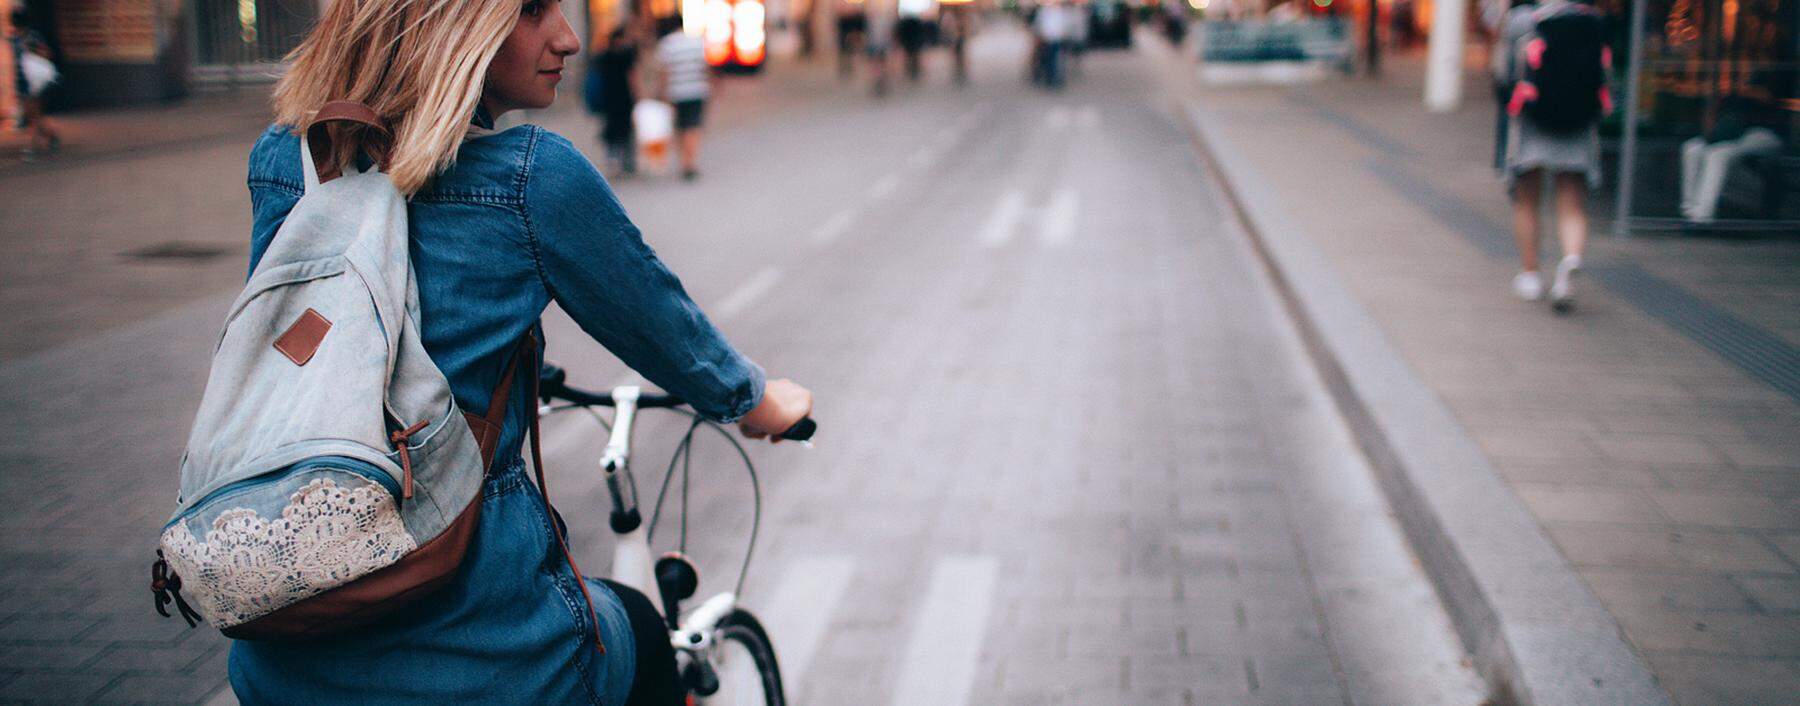 Cycling the city